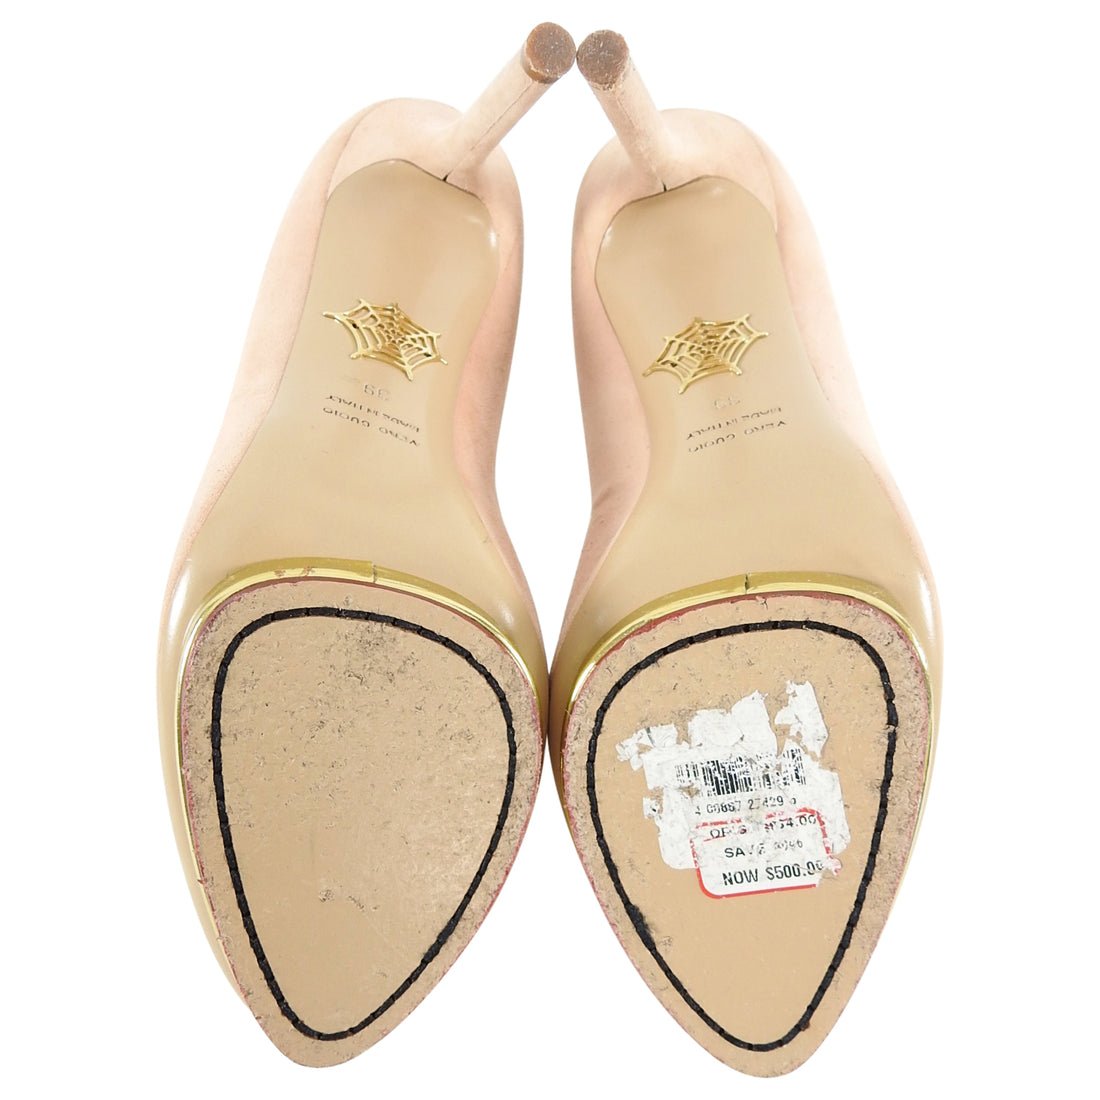 Charlotte Olympia Nude Suede Gold Platform Pumps - 8.5